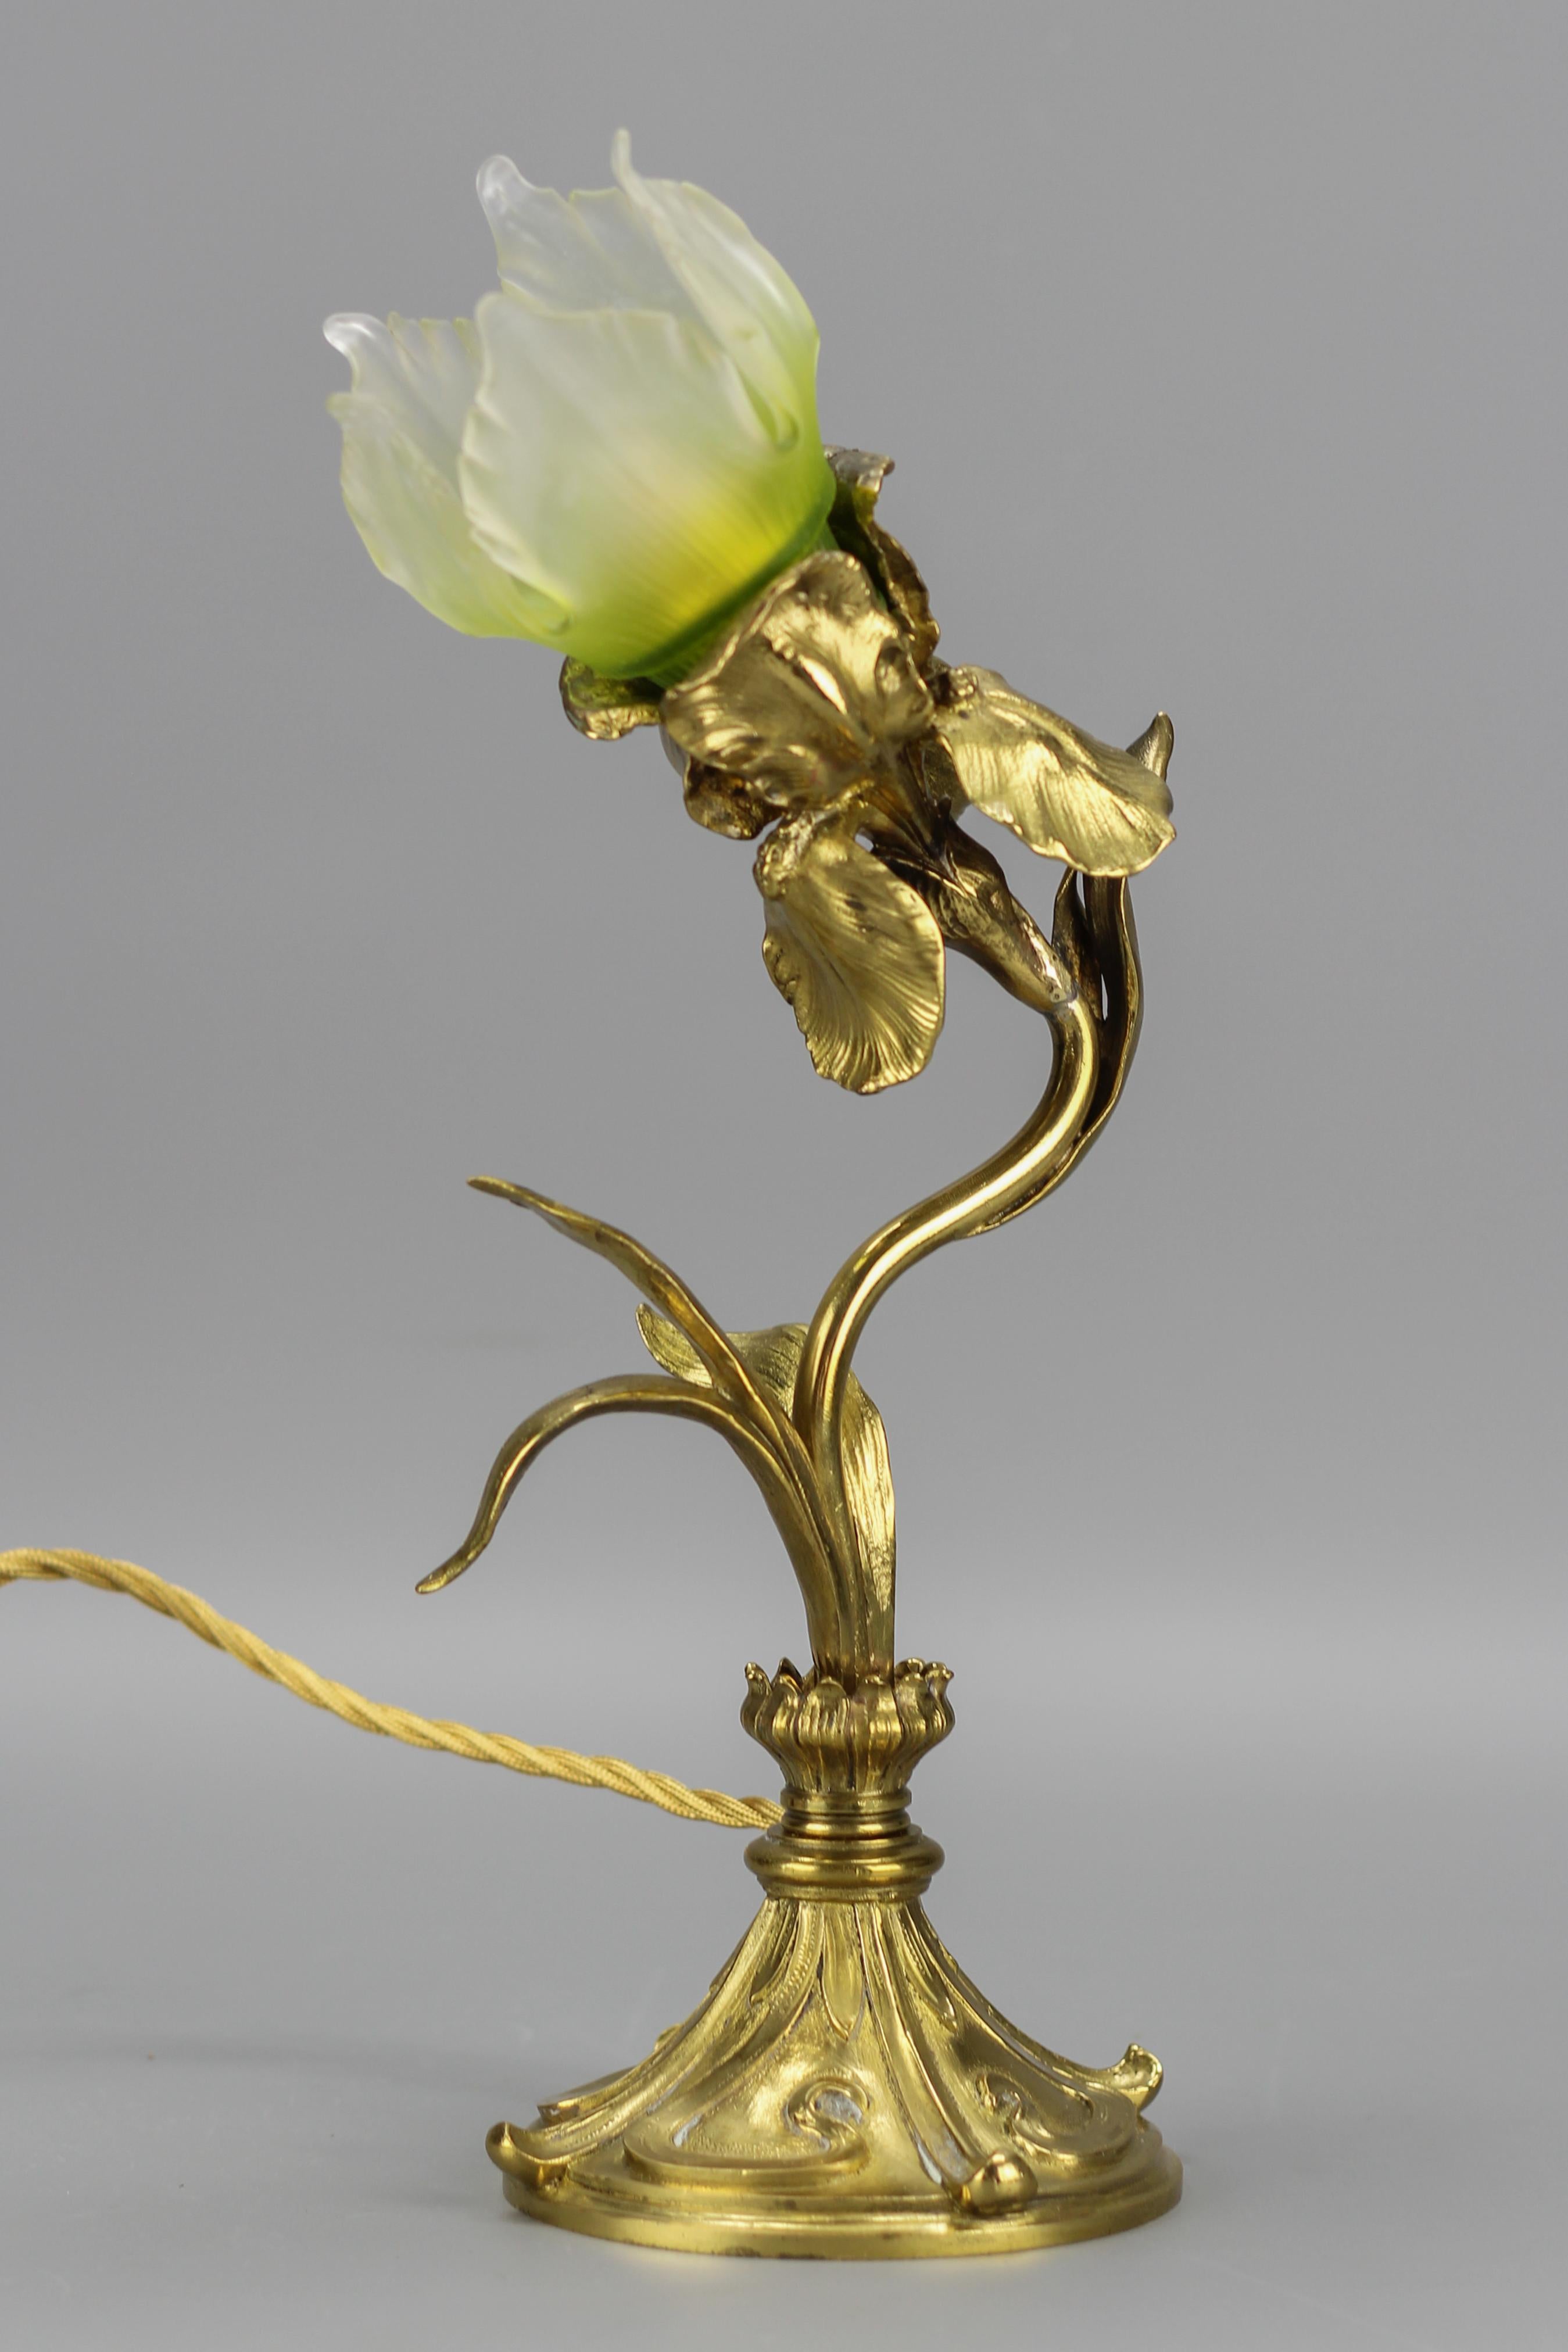 French Art Nouveau Gilt Bronze and Glass Iris-Shaped Table Lamp, 1920s
An adorable French gilt bronze table lamp in a shape of an iris flower with leaves.
Beautiful light green and clear glass lampshade.
Dimensions: height: 37 cm / 14.56 in; width: